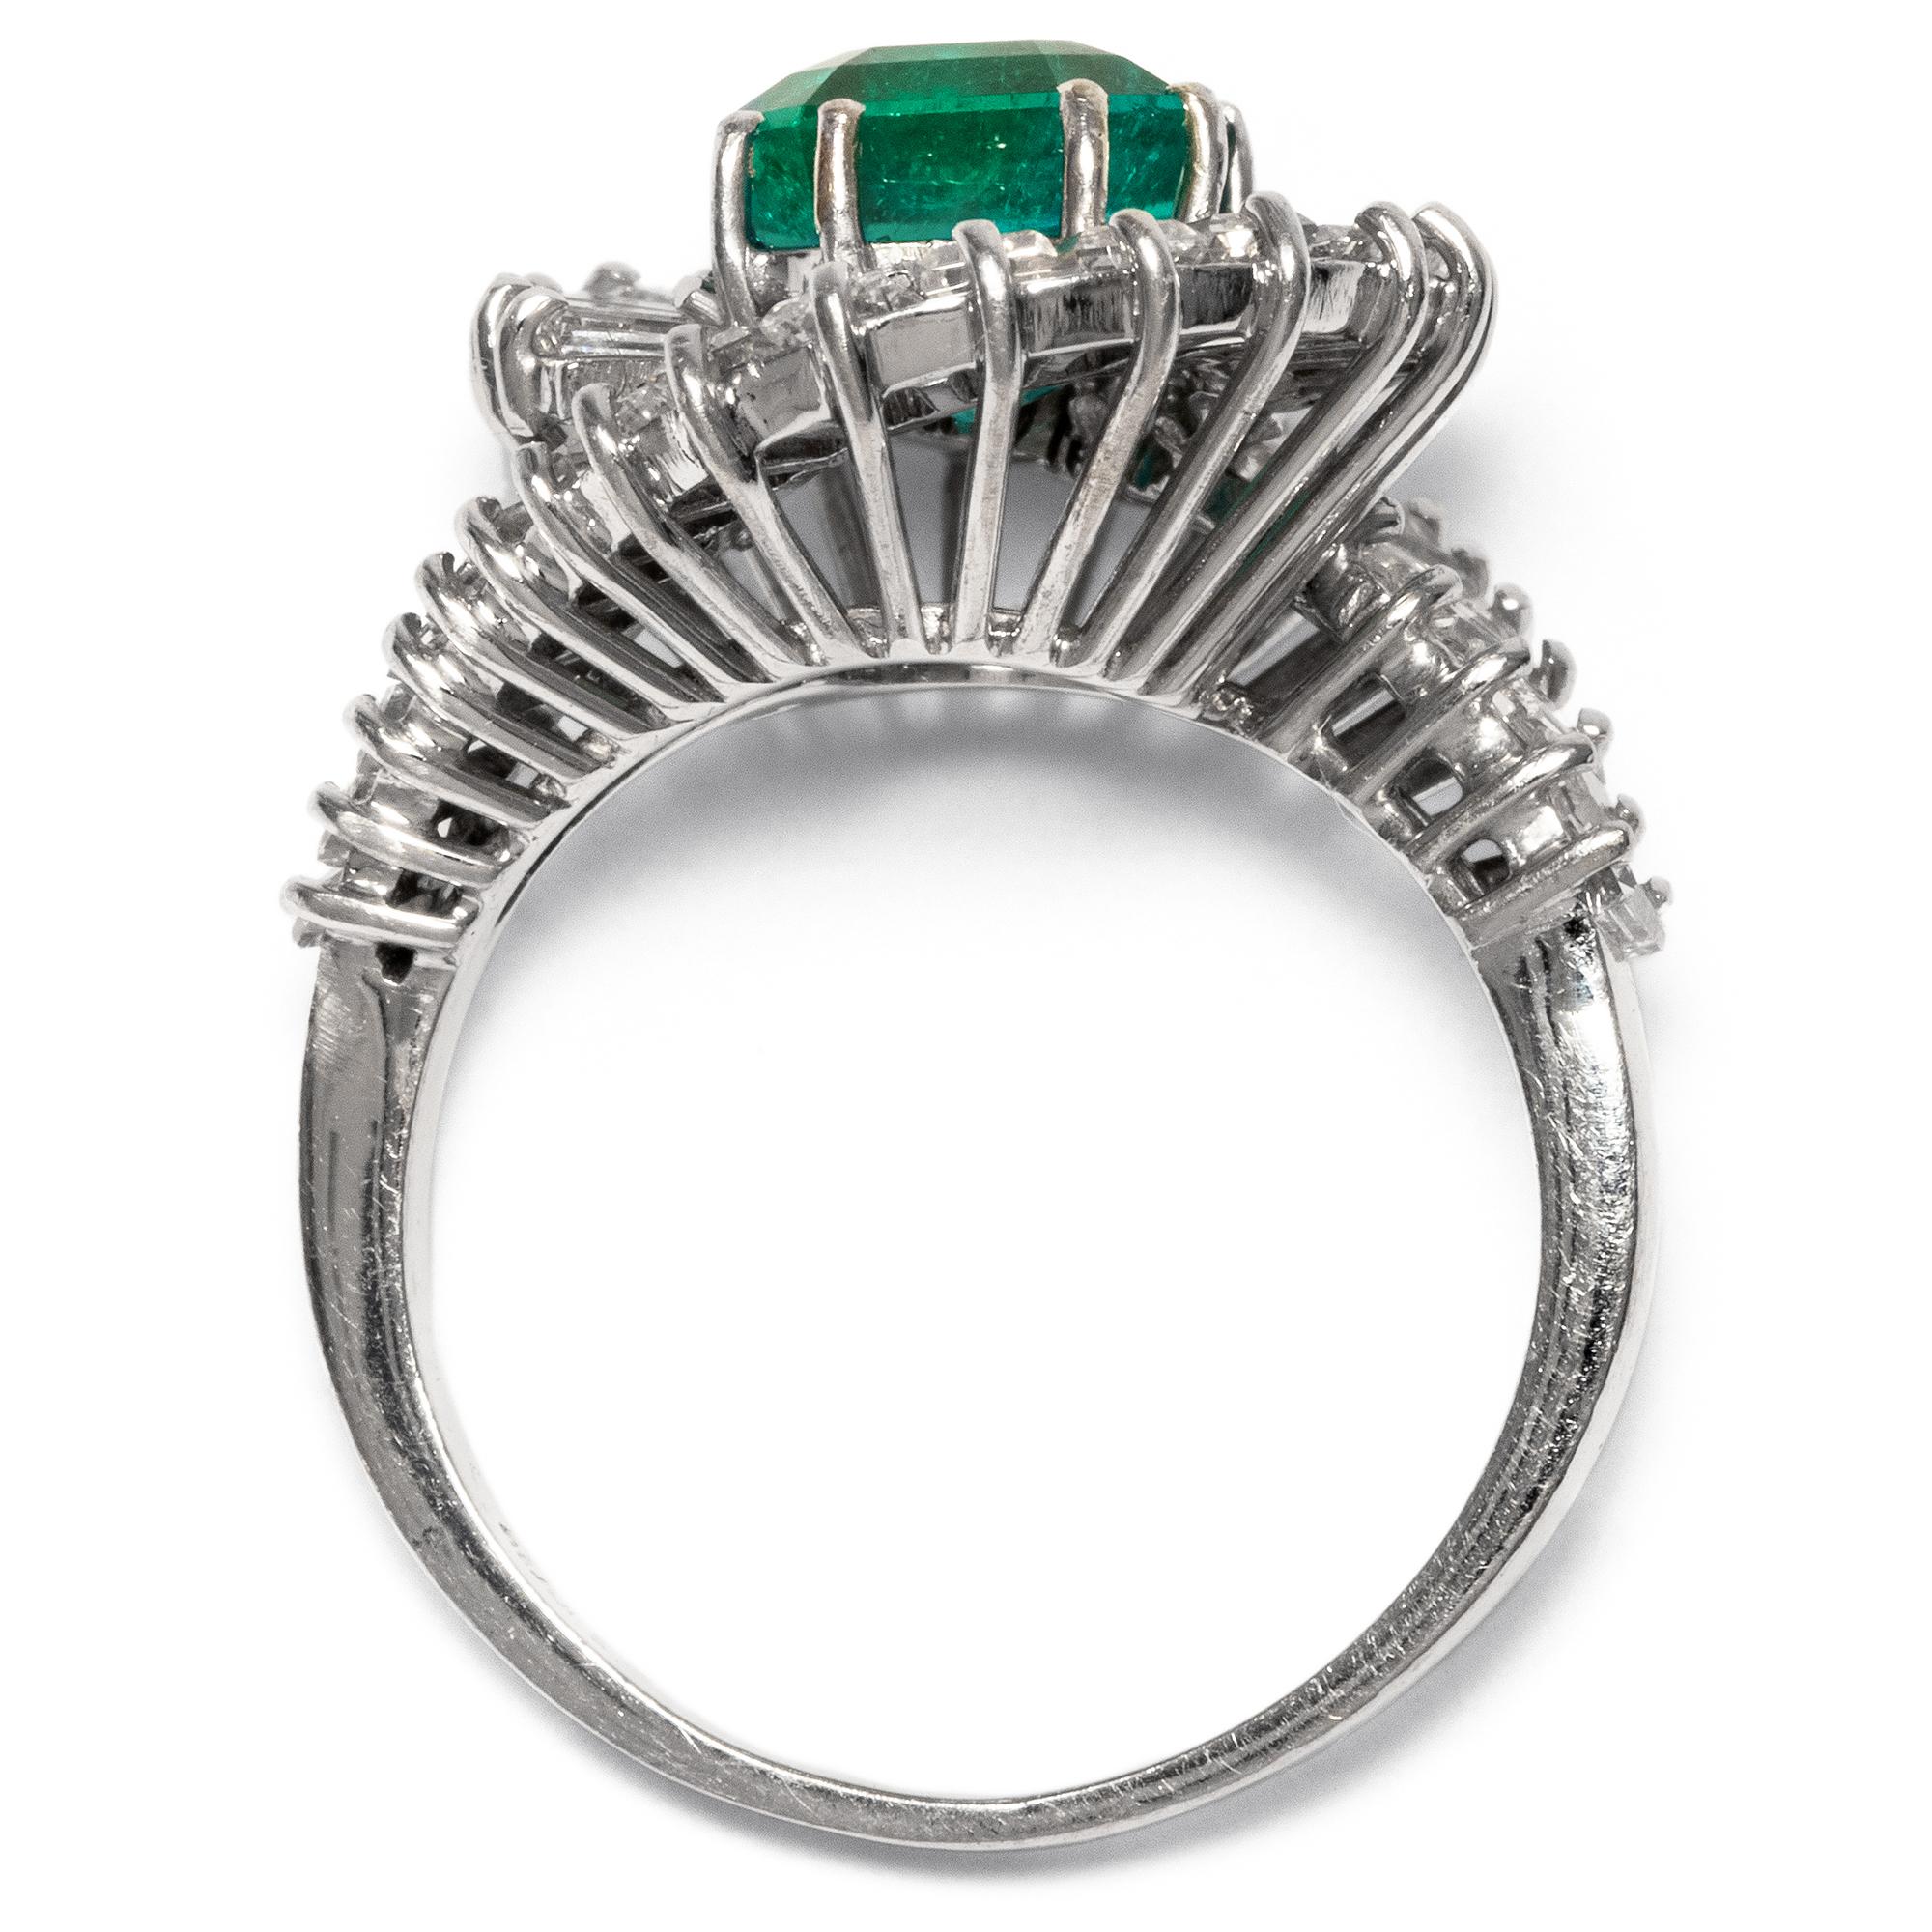 Vintage 1970s Certified 1.88 Carat Colombian Emerald Diamond Ballerina Ring For Sale 1